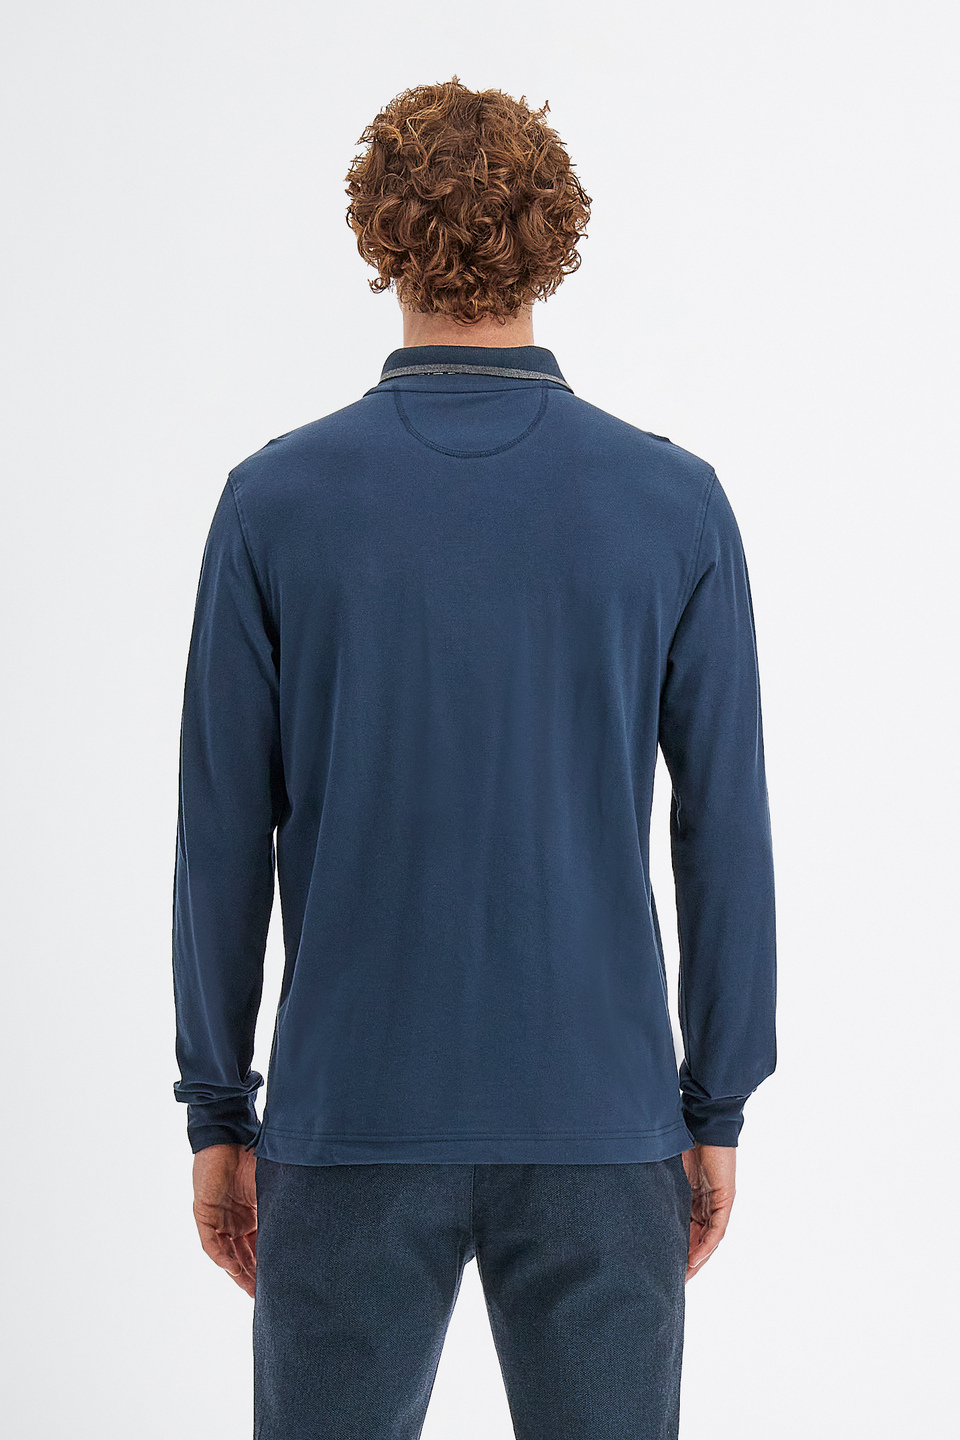 Men’s Polo Guards with long sleeves in regular fit stretch piqué cotton | La Martina - Official Online Shop